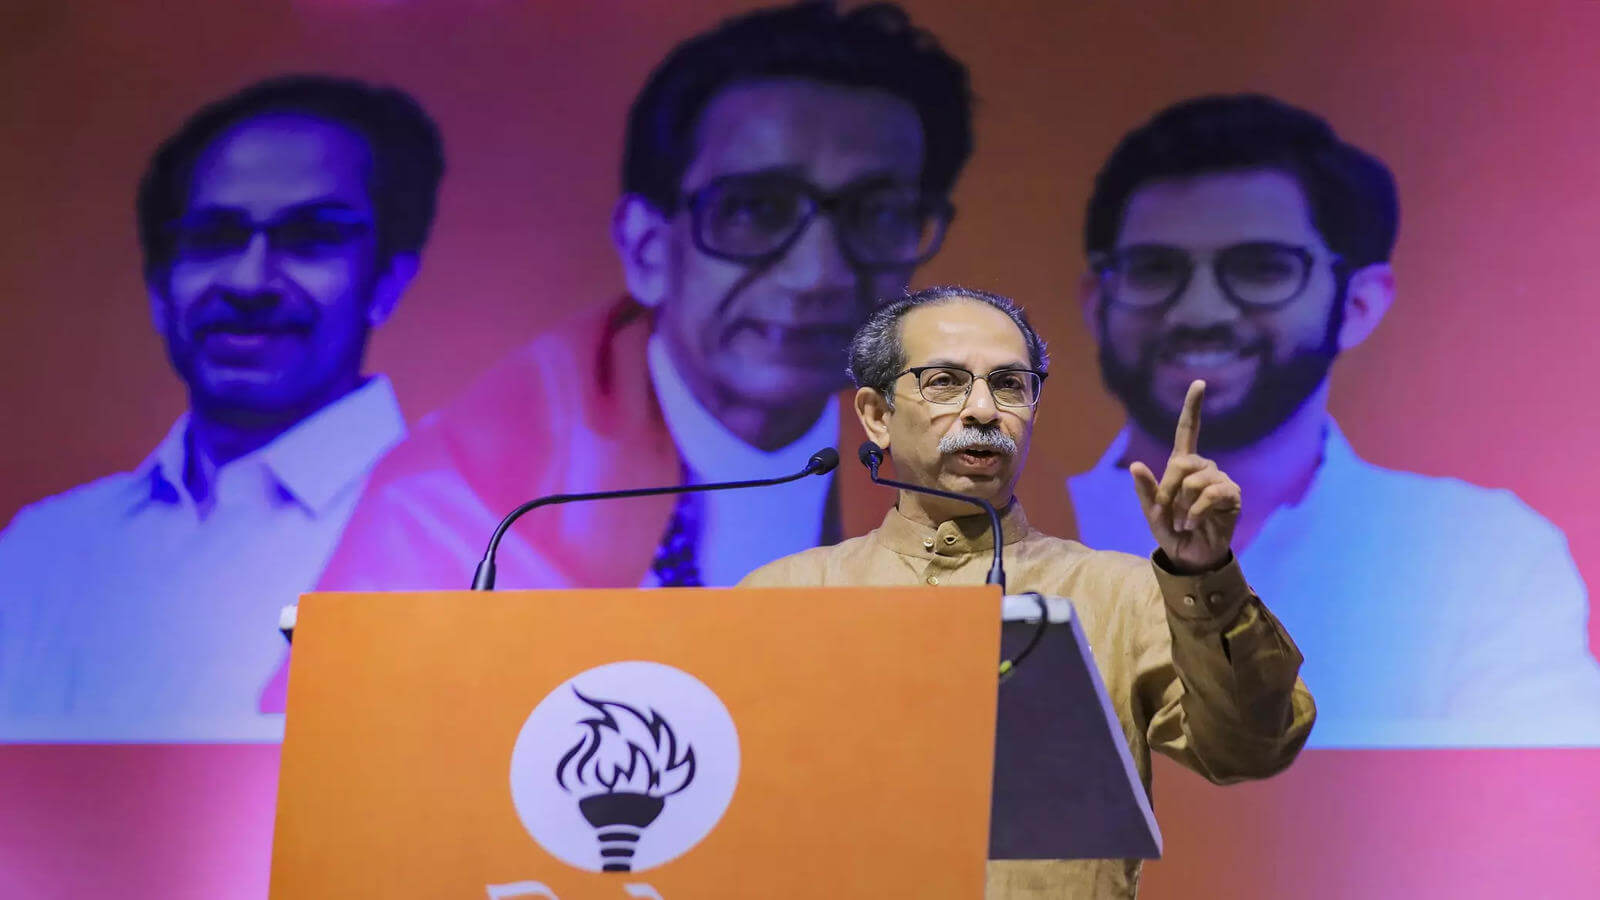 Shiv Sena (UBT) likely to go solo in Maharashtra polls: Sources